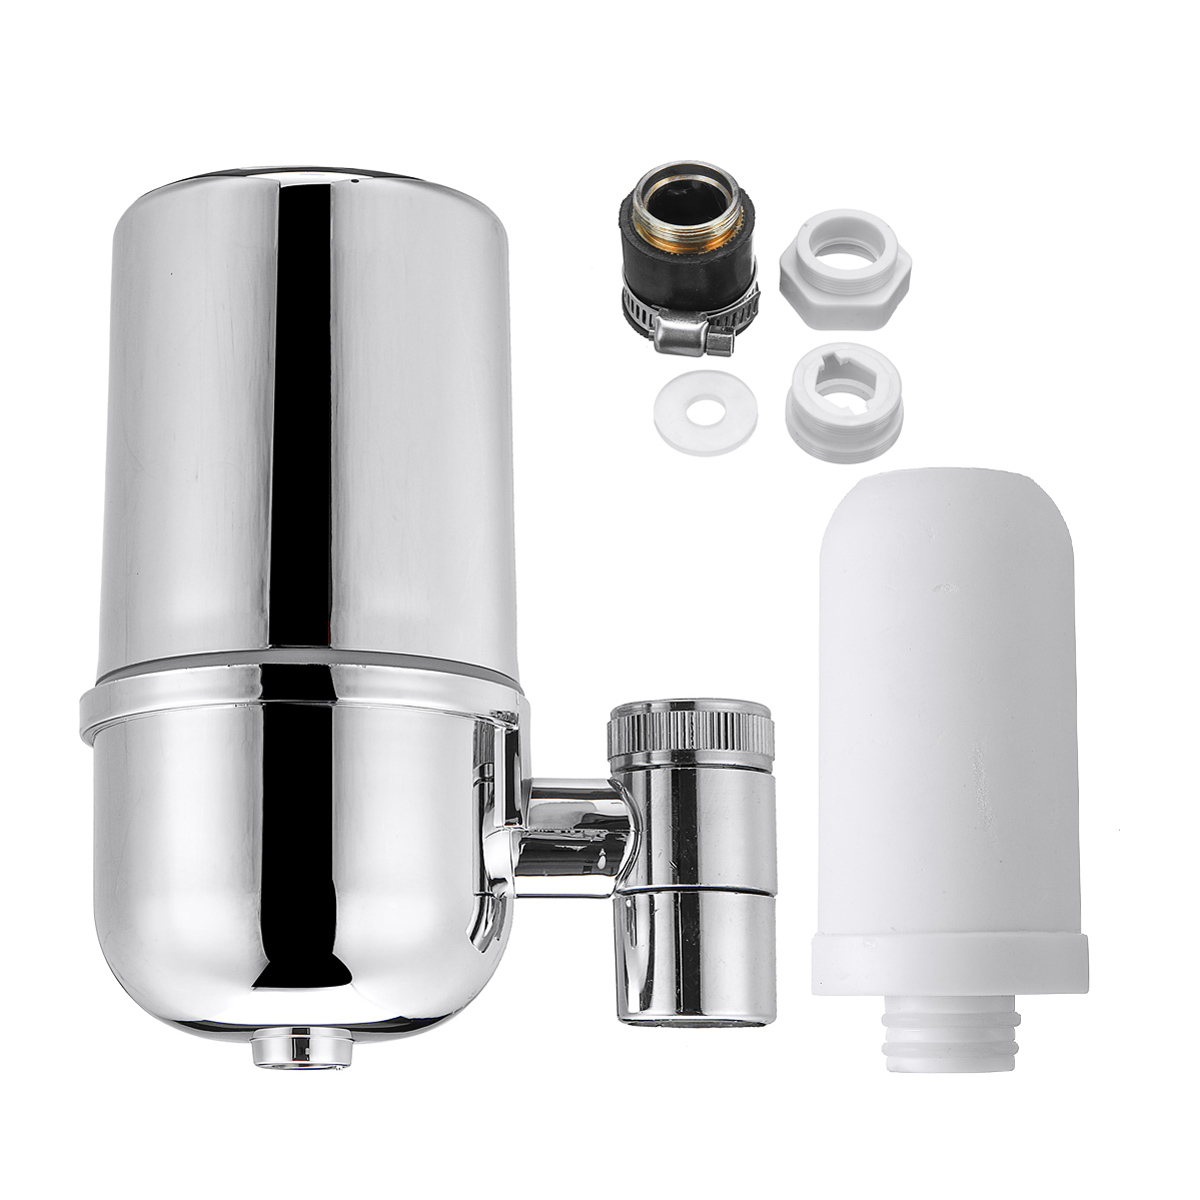 

Faucet Water Filter For Kitchen Household Bathroom Mount Filtration Tap Purifier